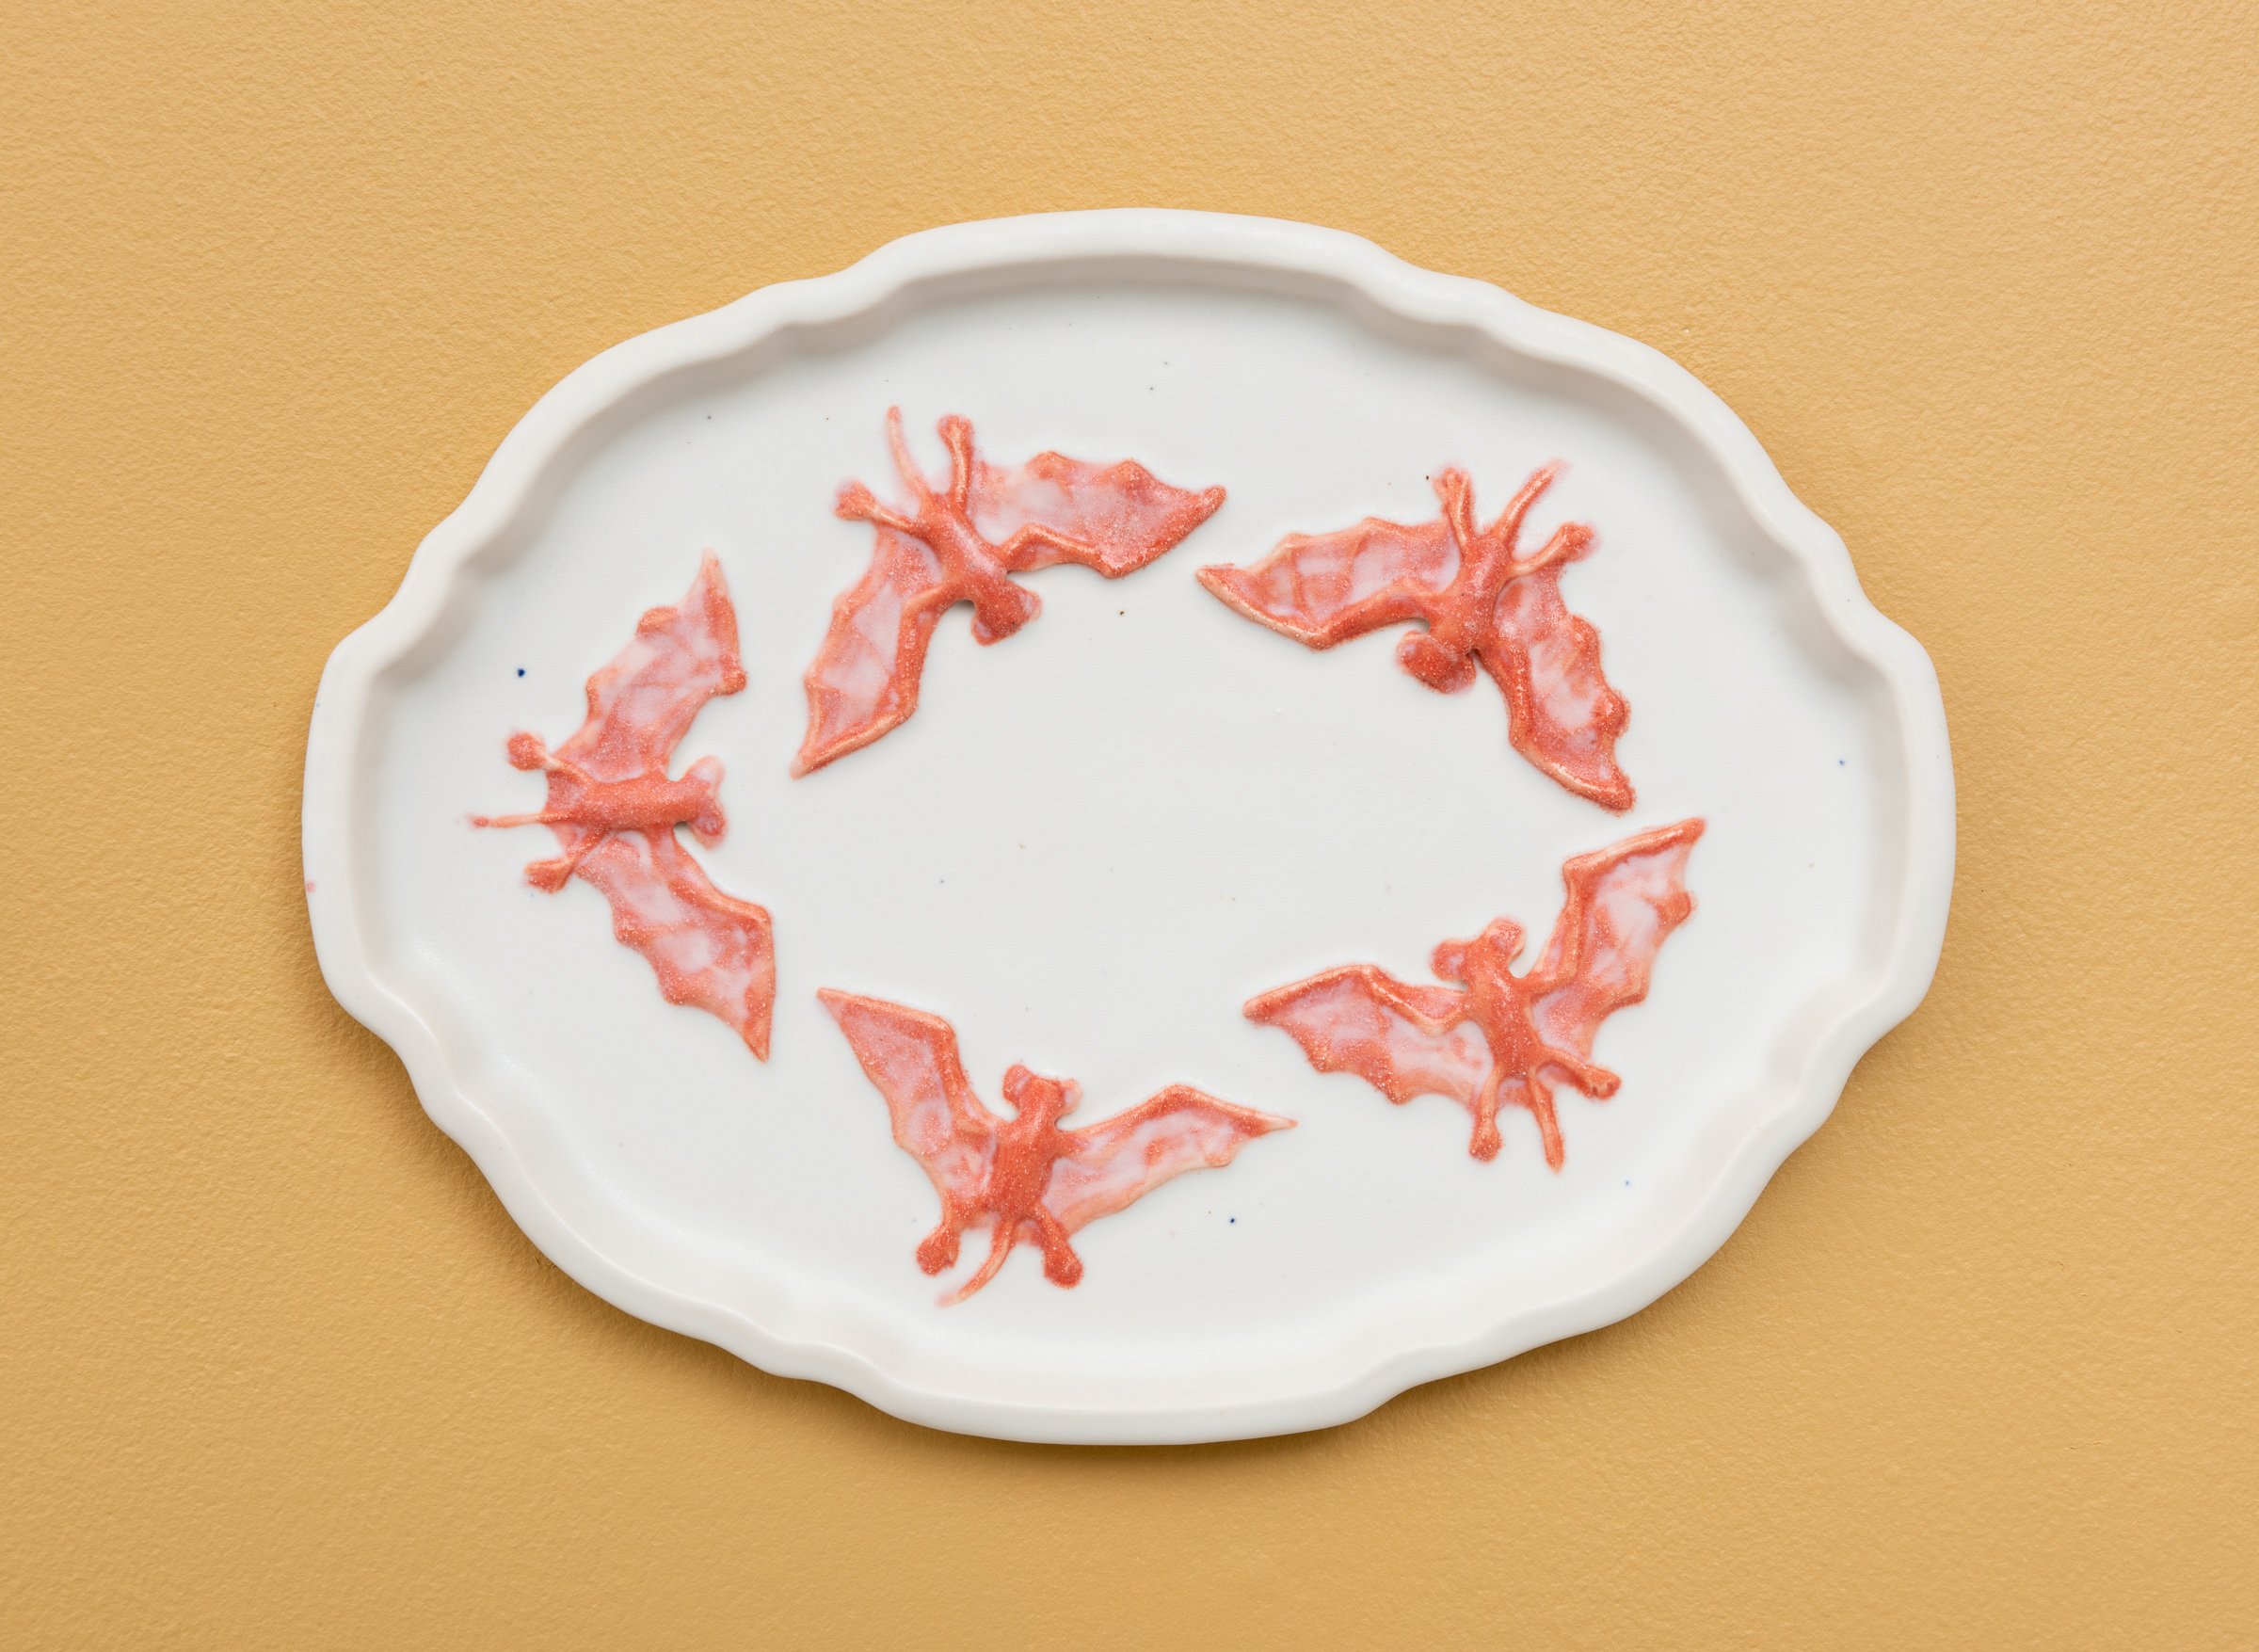  Why do Europeans put plates on their walls? III | 2022  Porcelain, glazes, porcelain decals and tissue paper, press molding. 39x30x3cm  Photo: Thomas Tveter 